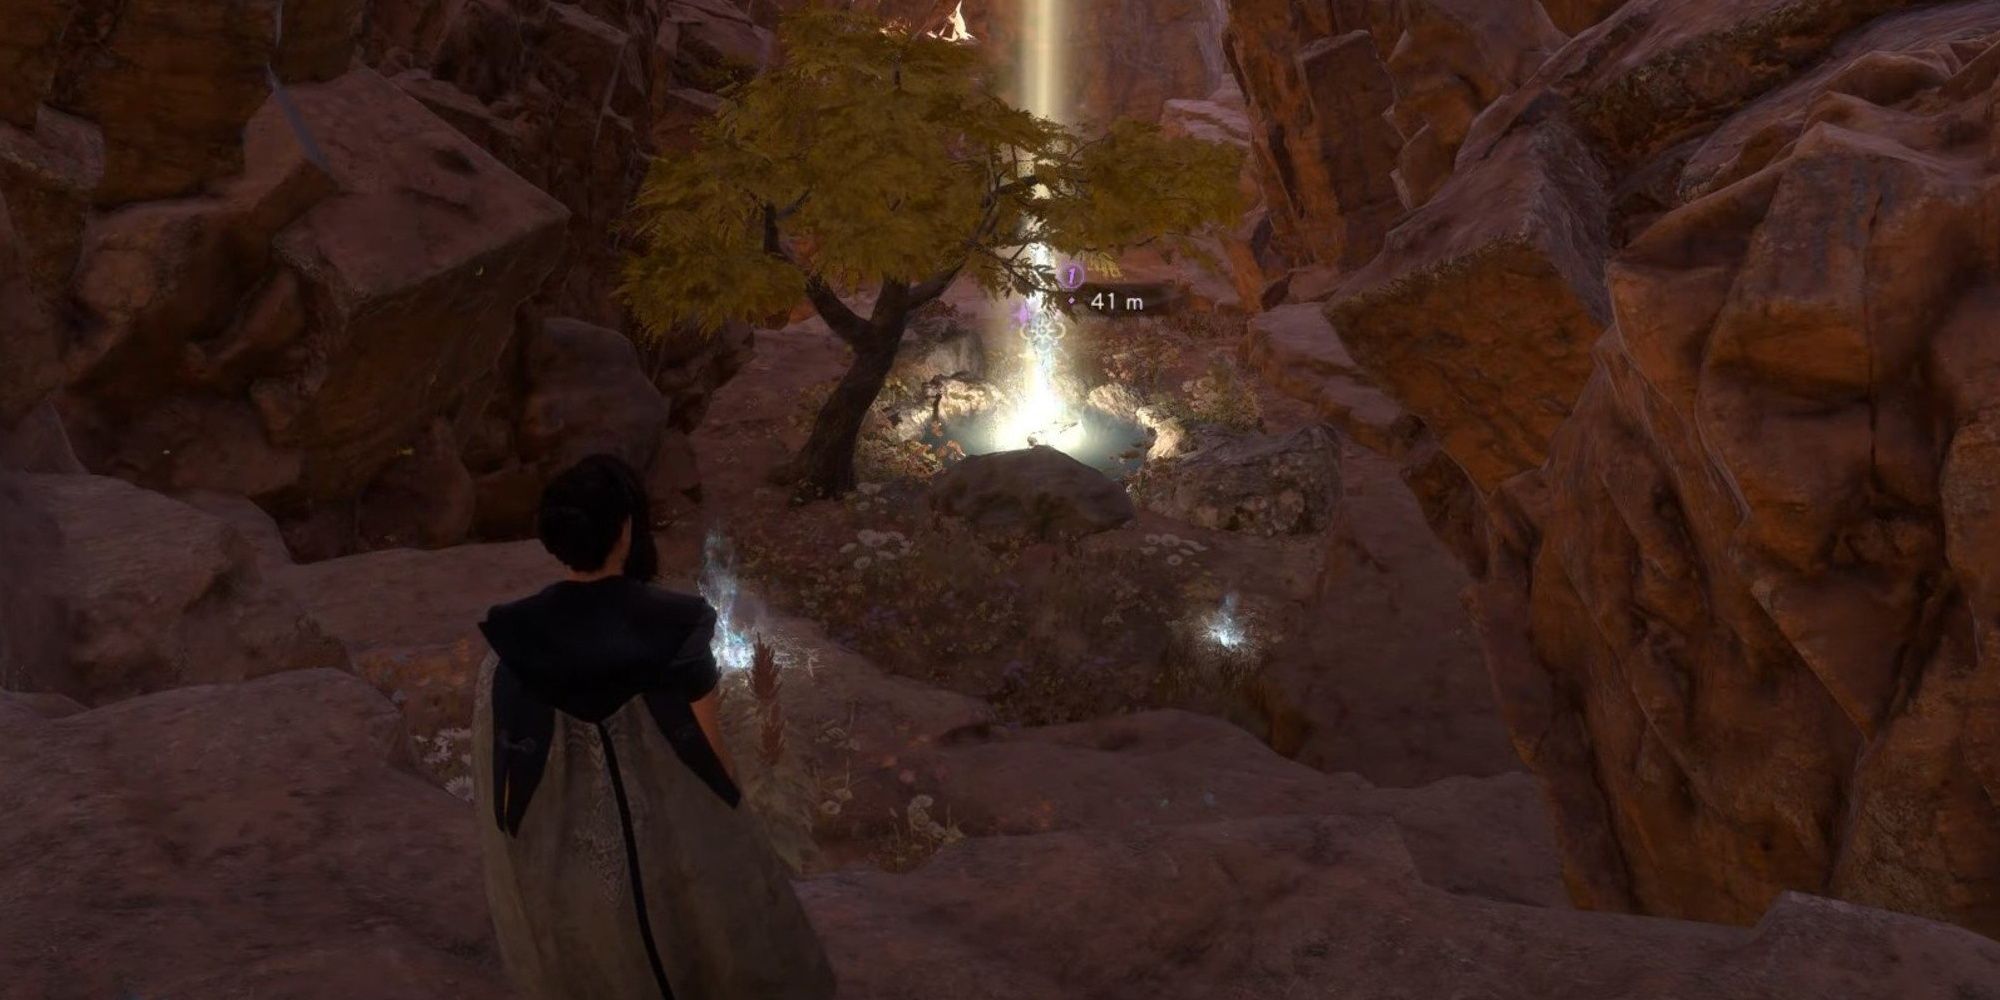 The Brass Hollow Fount was found by the character in Forspoken located in a small cavern opening with a tree resting next to the waters.